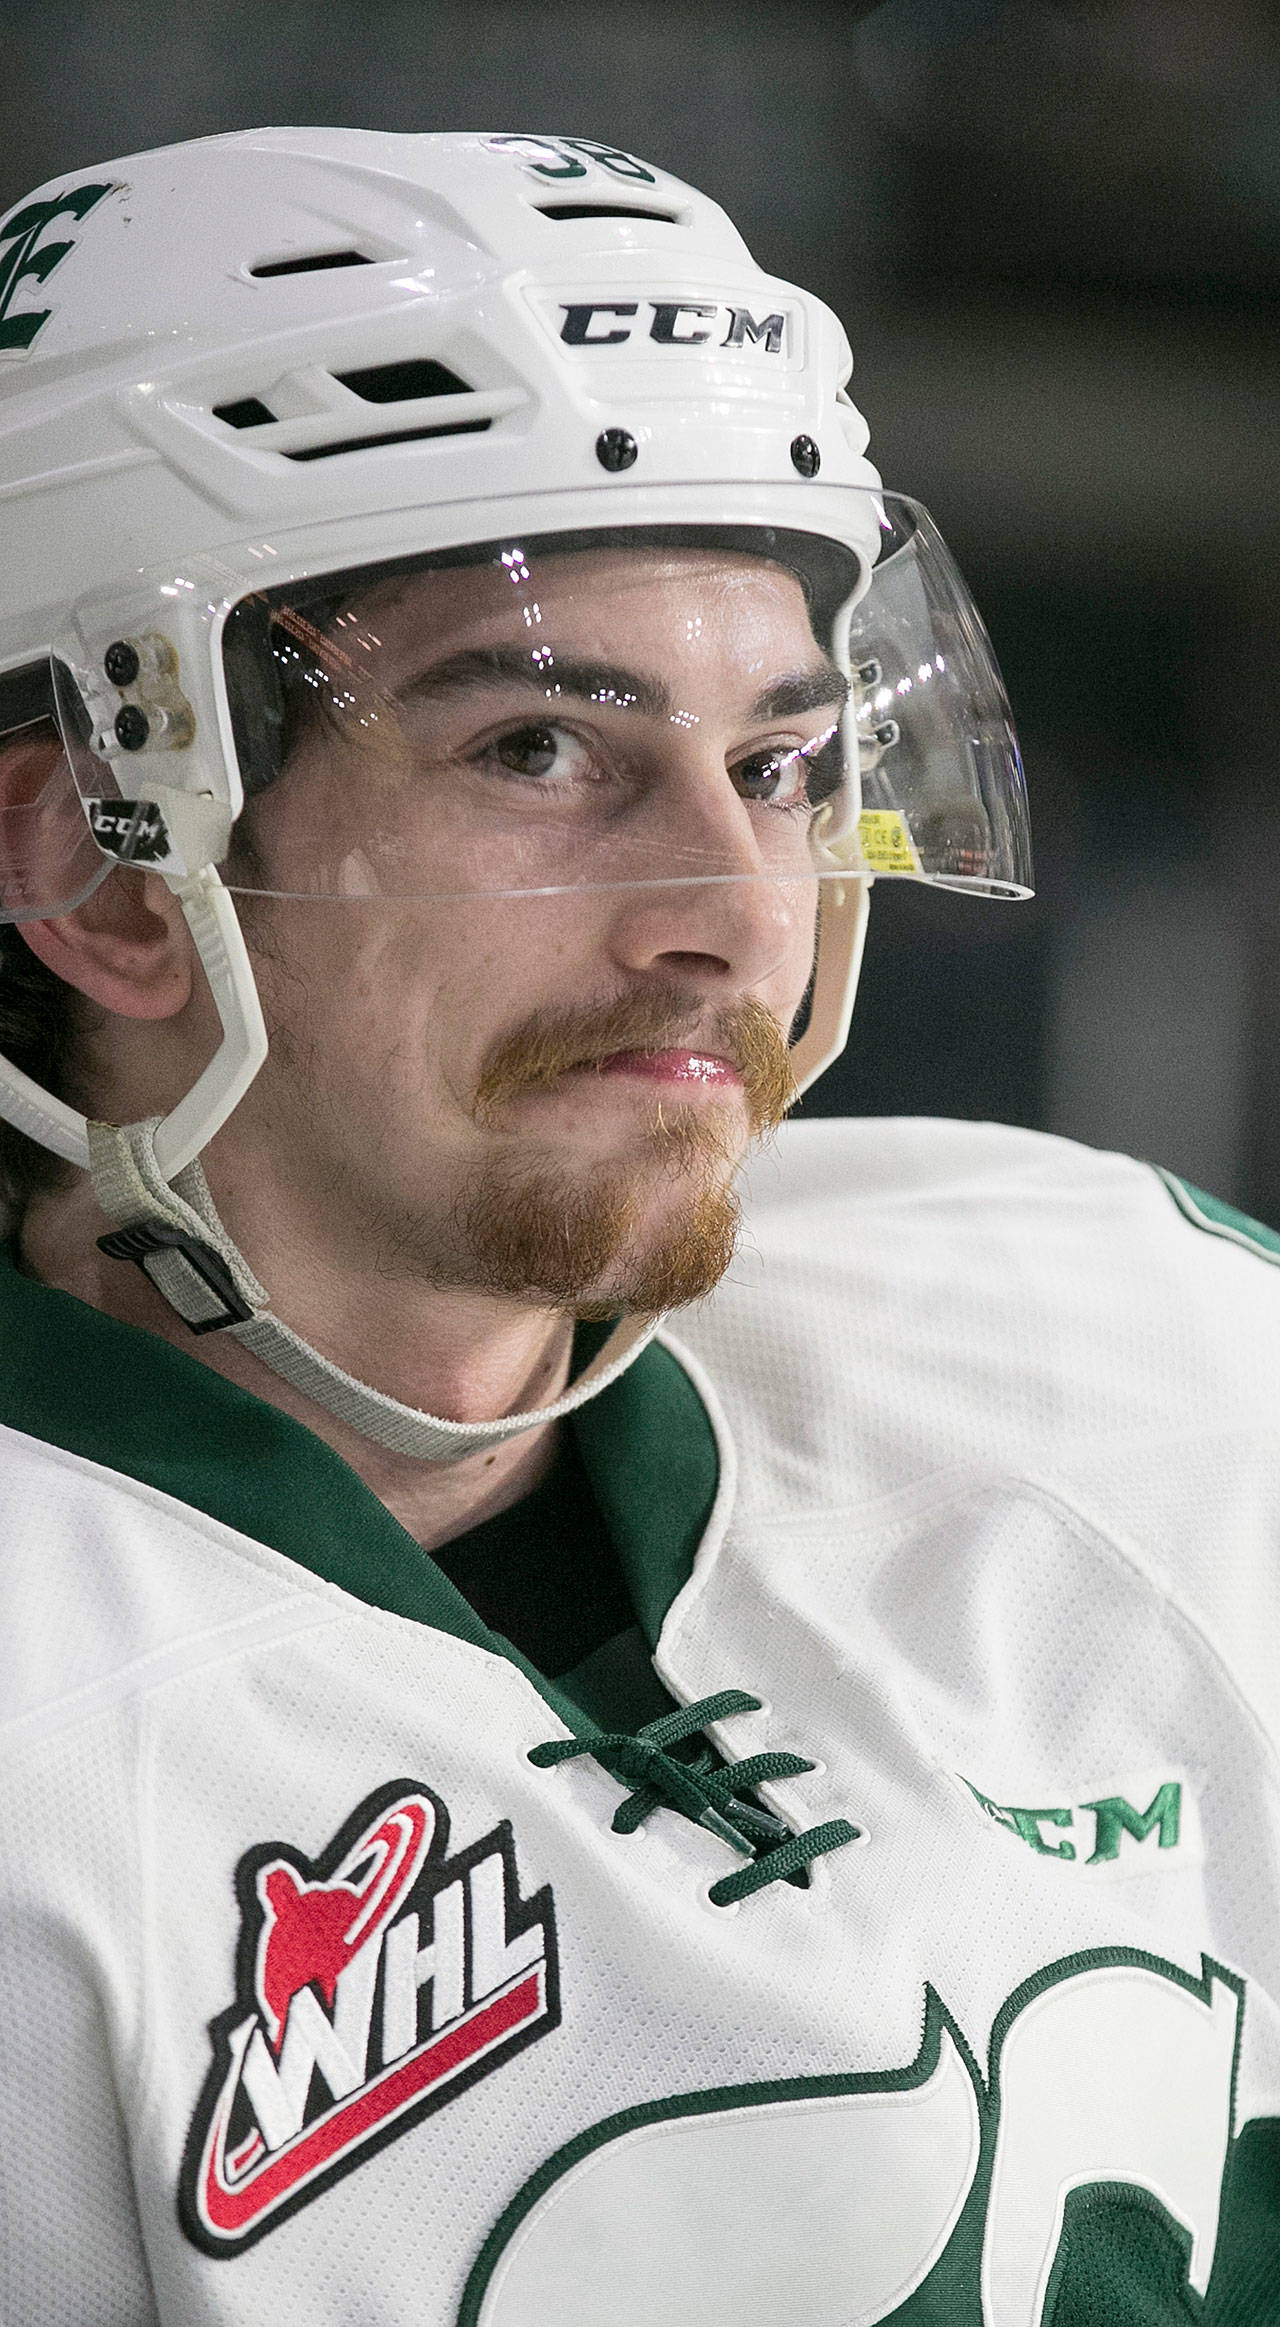 Everett’s Kevin Davis scored a power-play goal in overtime to send the Silvertips to the WHL finals for the first time since their inaugural 2003-04 season Monday, as Everett beat Tri-City 6-5 to win the Western Conference finals series 4-2. (Kevin Clark / The Herald)